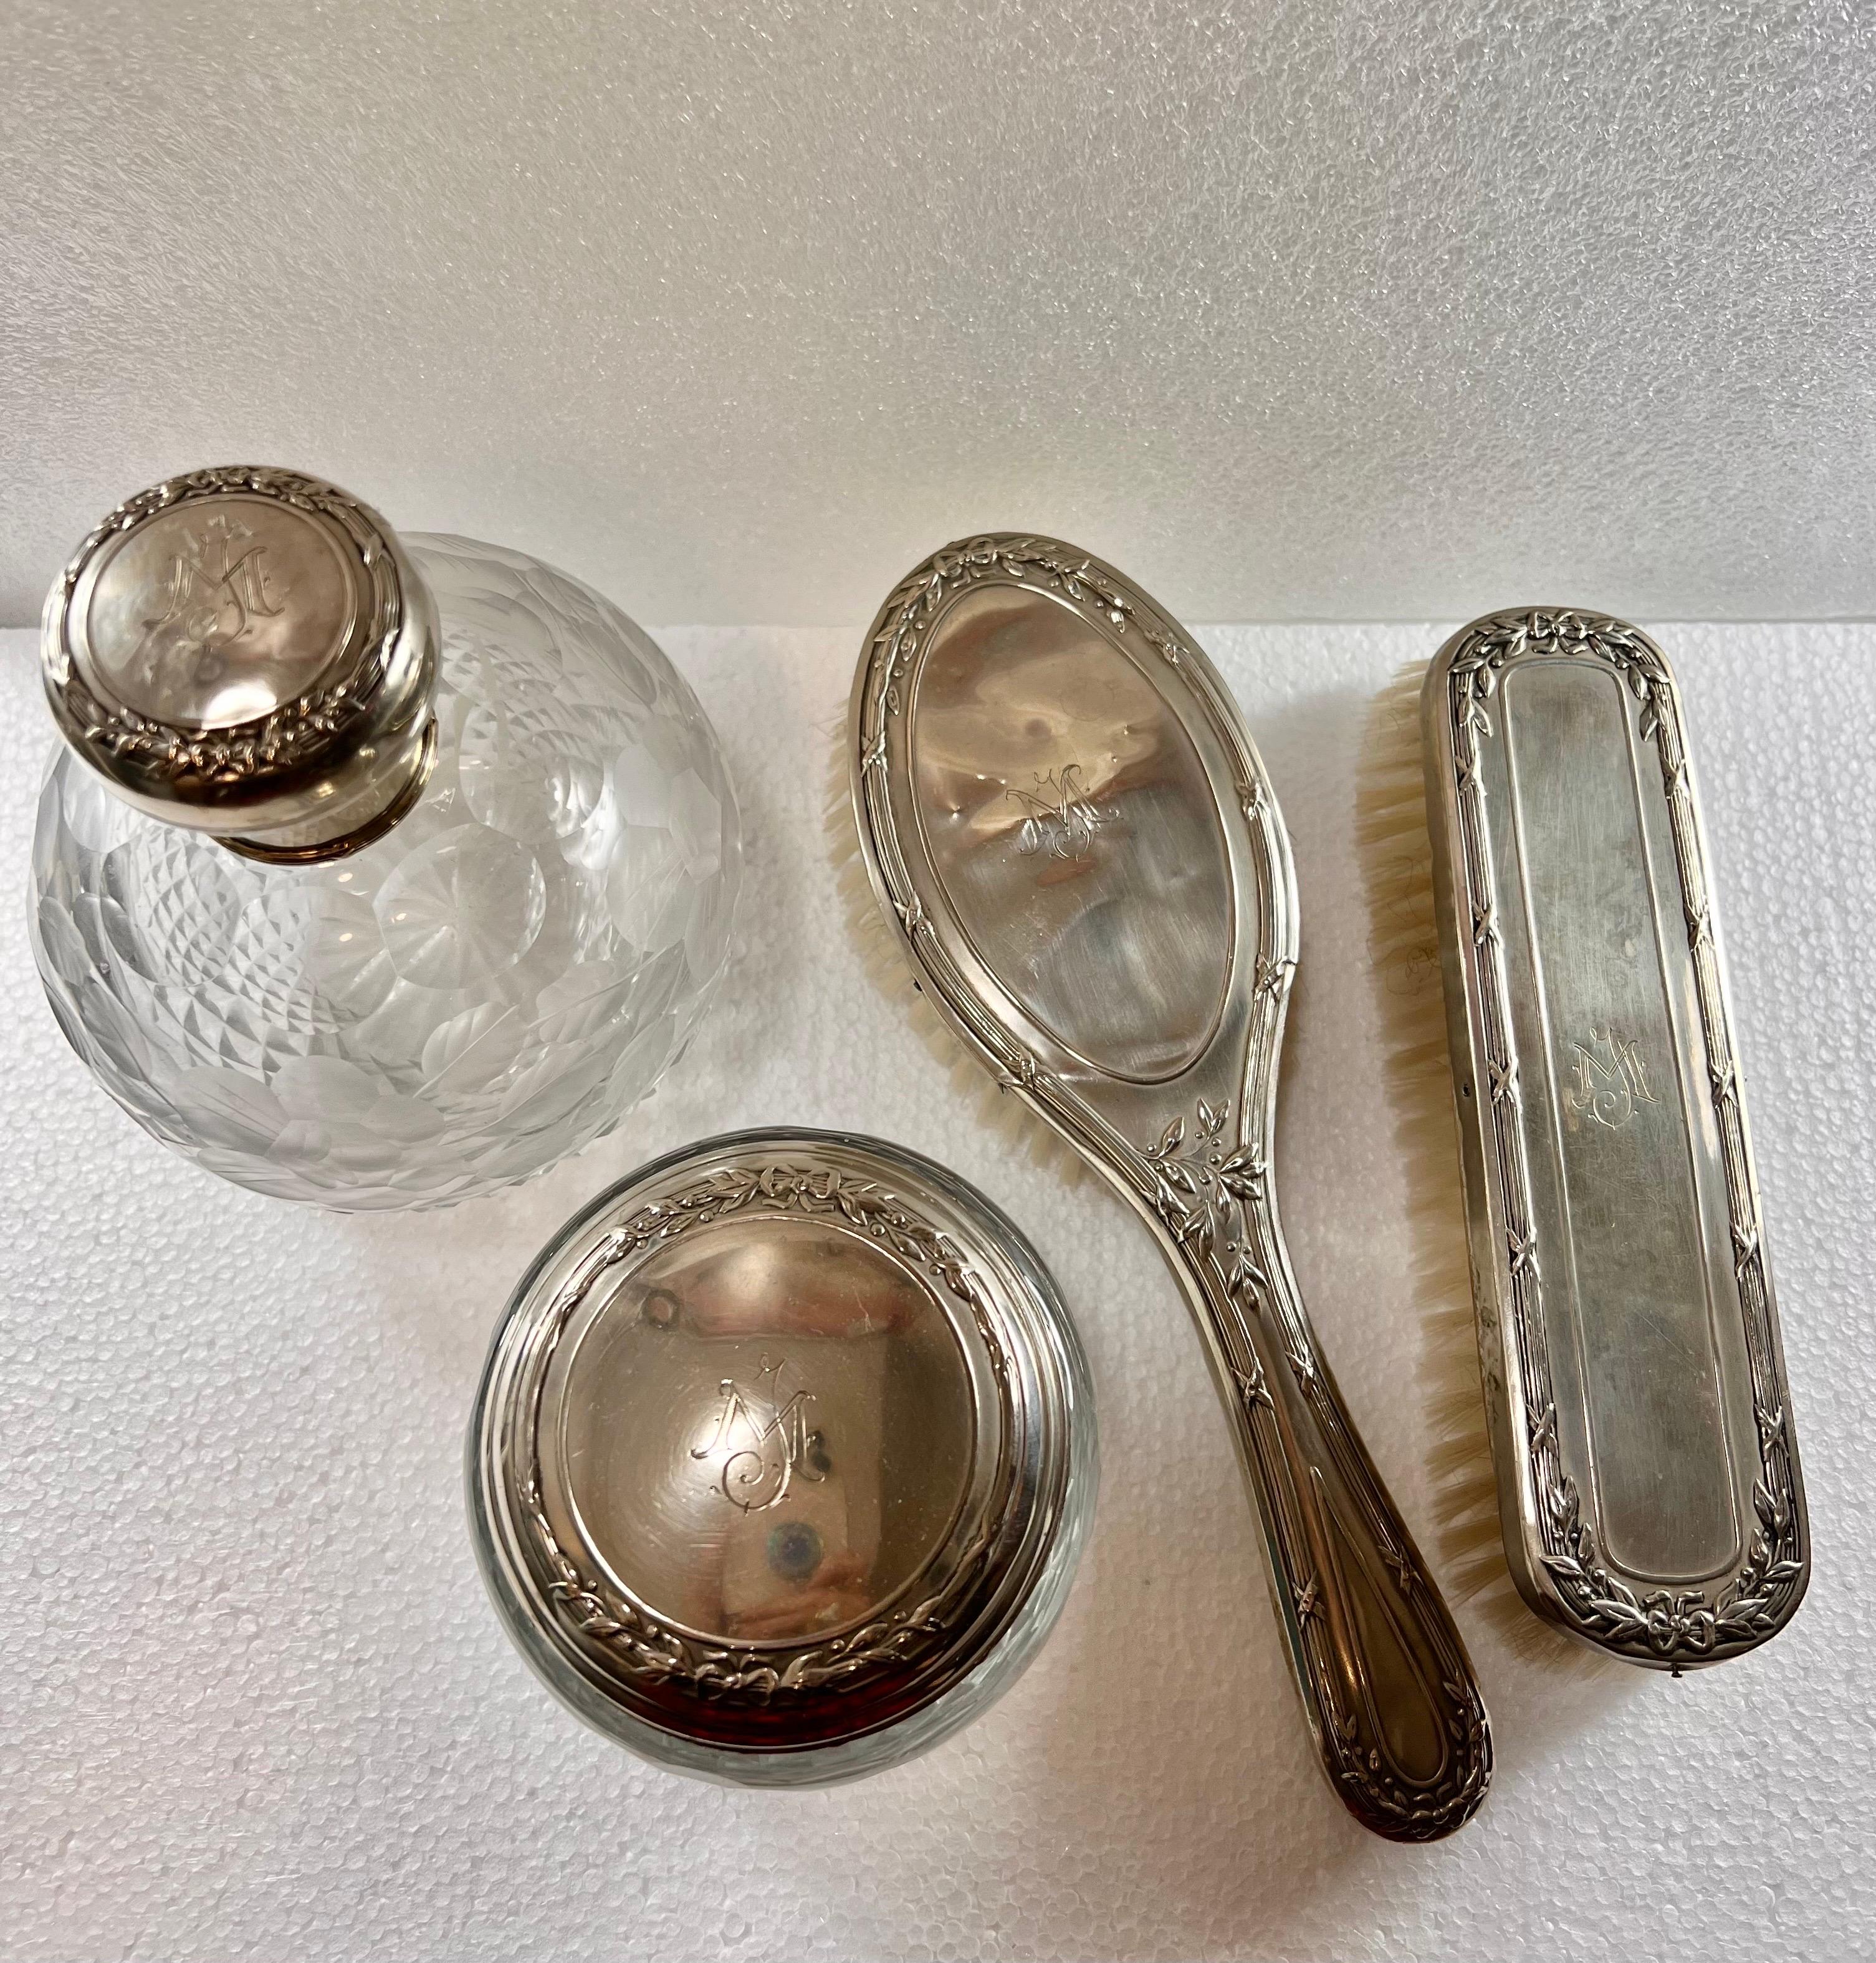 Four-piece vanity set in solid cut glass and silver. It includes a hand mirror with a beveled glass, one bottles, a clothes brush and a hair brush. The glass of jars and jars is solid and carved. All parts in silver present a stamped decoration and